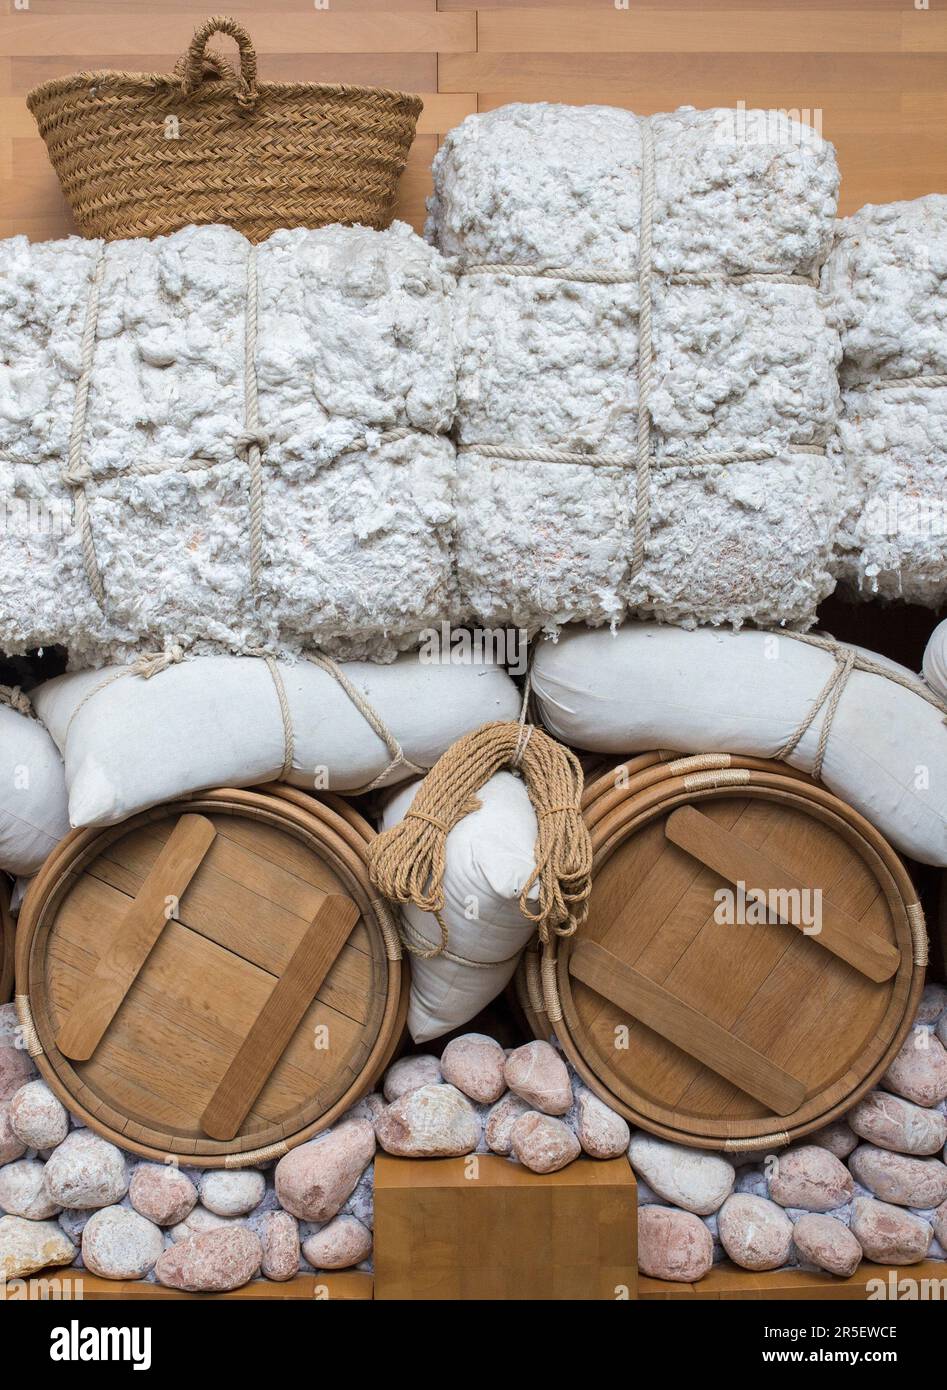 Cartagena, Spain - September 14th, 2018: Stowage of cargo in the hold of a sailing ship, cross section. ARQUA, Cartagena, Spain Stock Photo